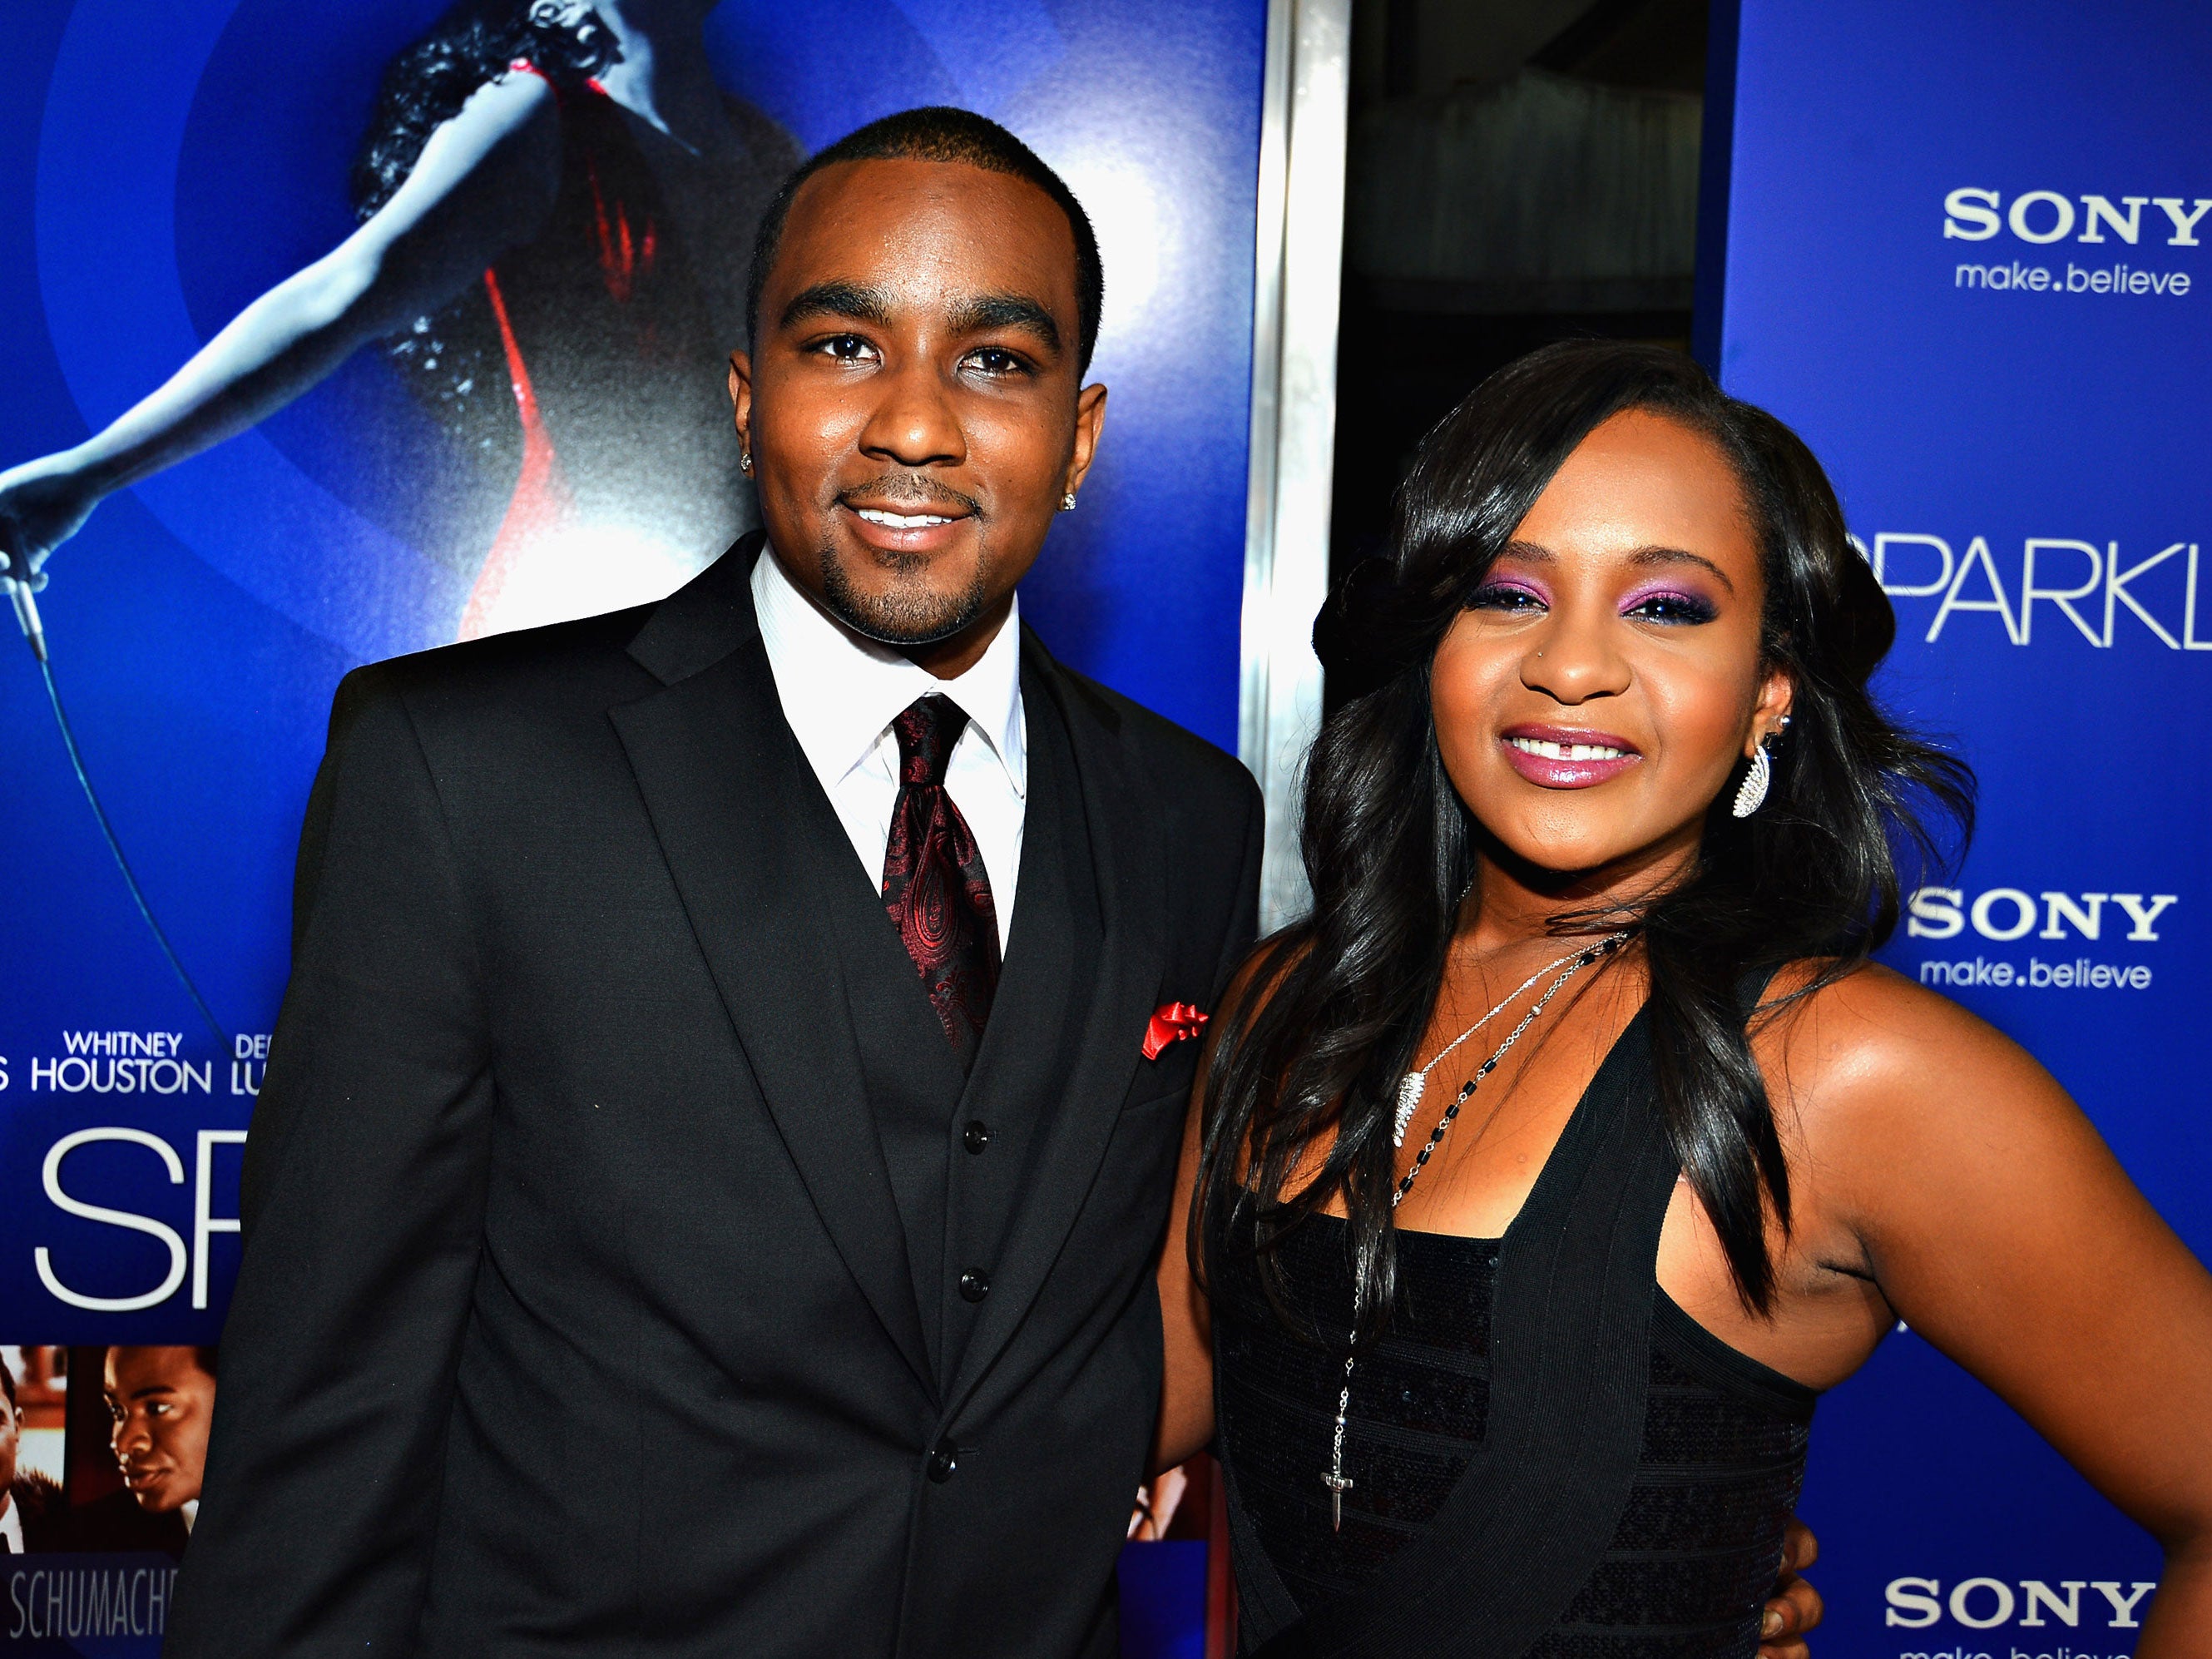 'Bobbi Kristina Brown passed away July, 26 2015, surrounded by her family'